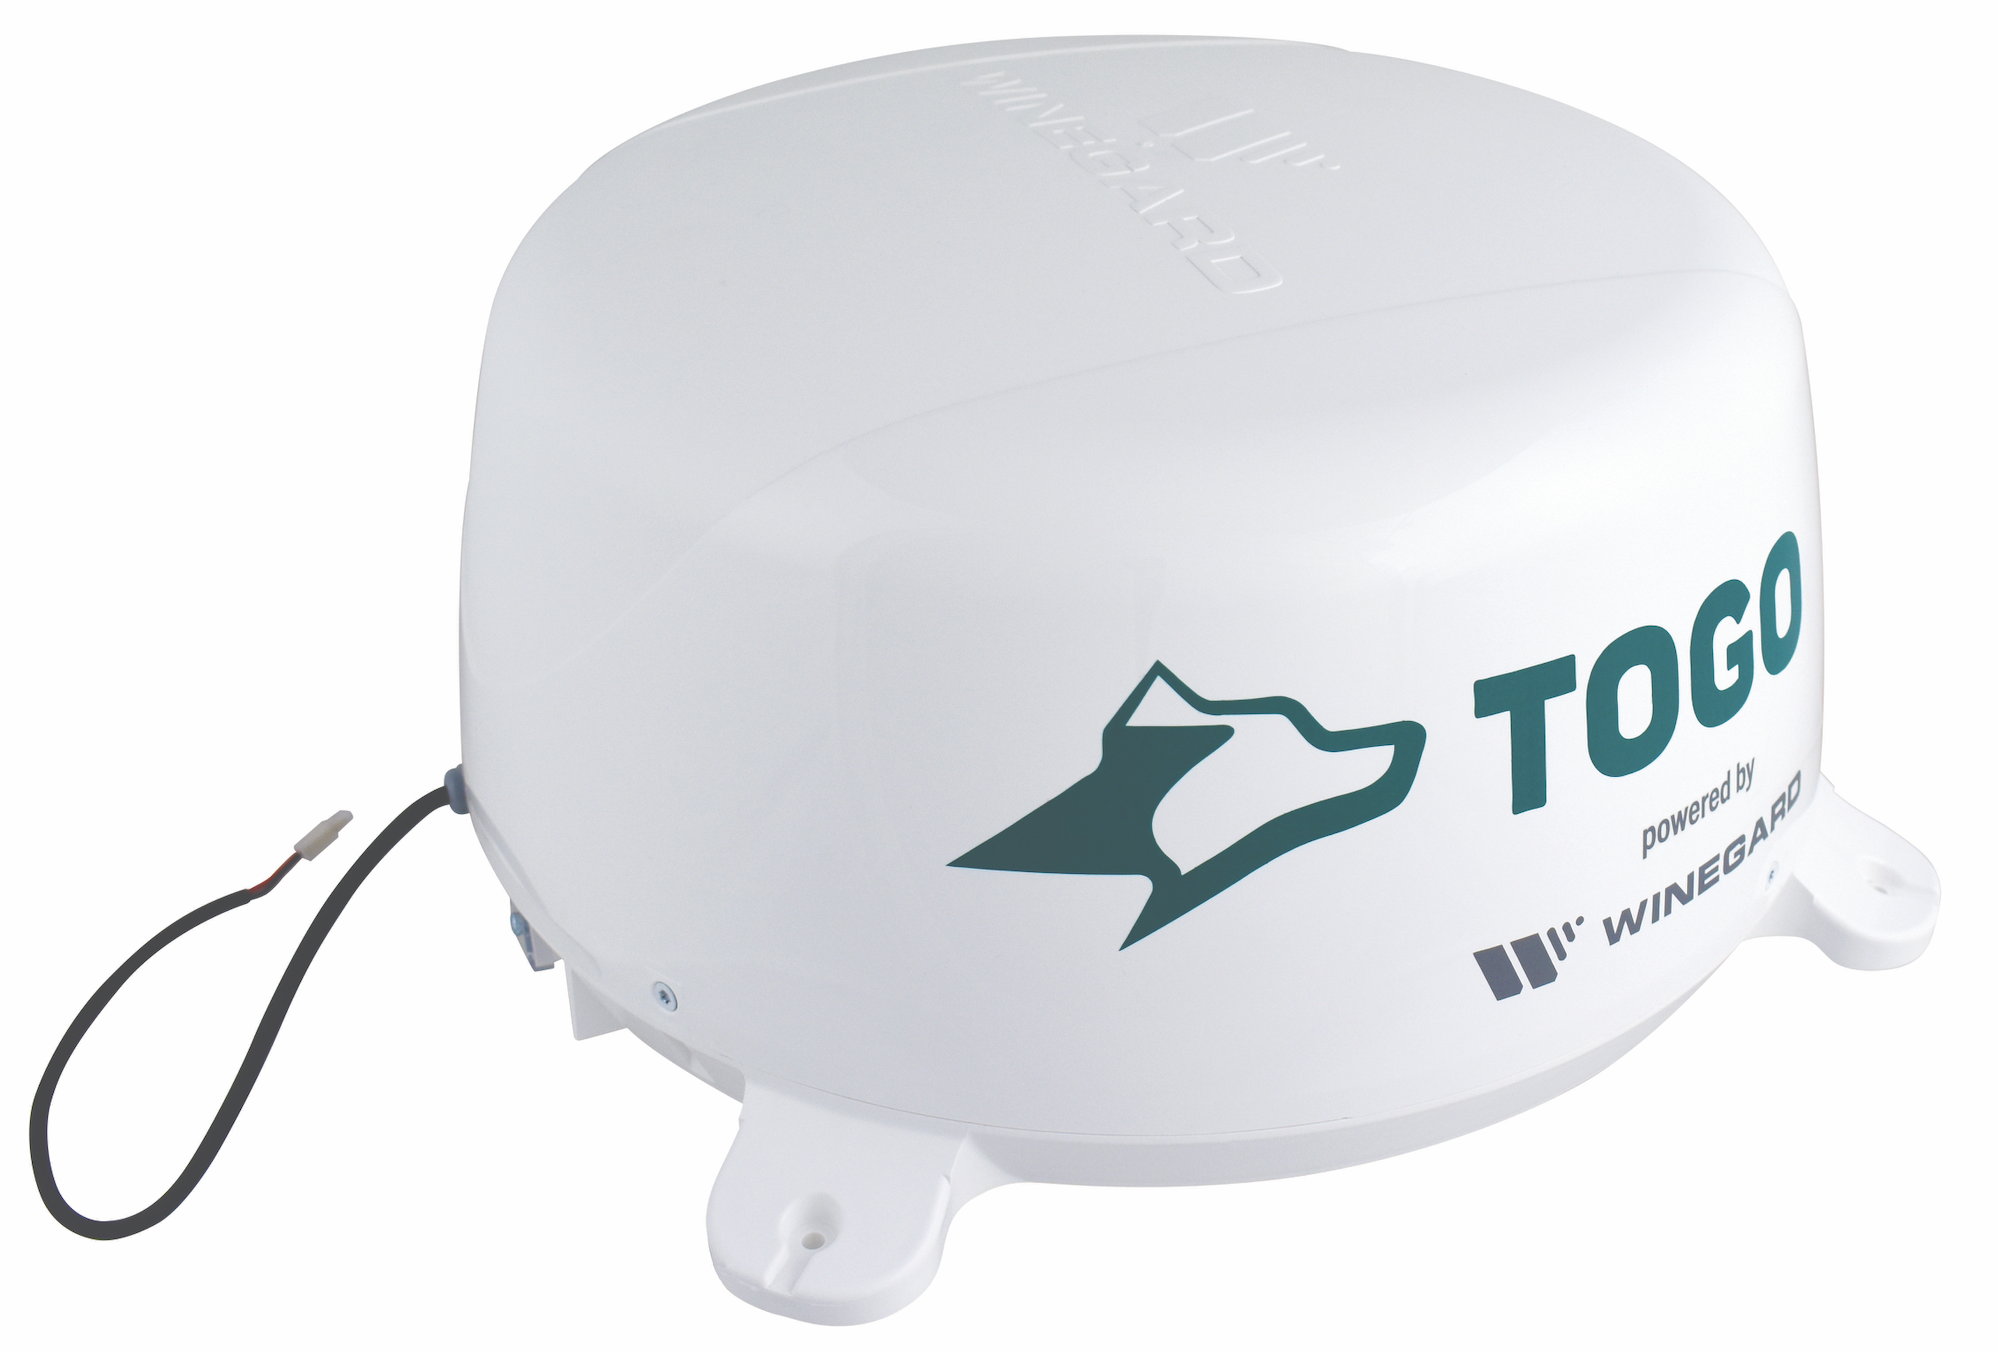 Review | Togo Roadlink LTE Router & WiFi Booster – Unlimited RV Internet for $30/Month